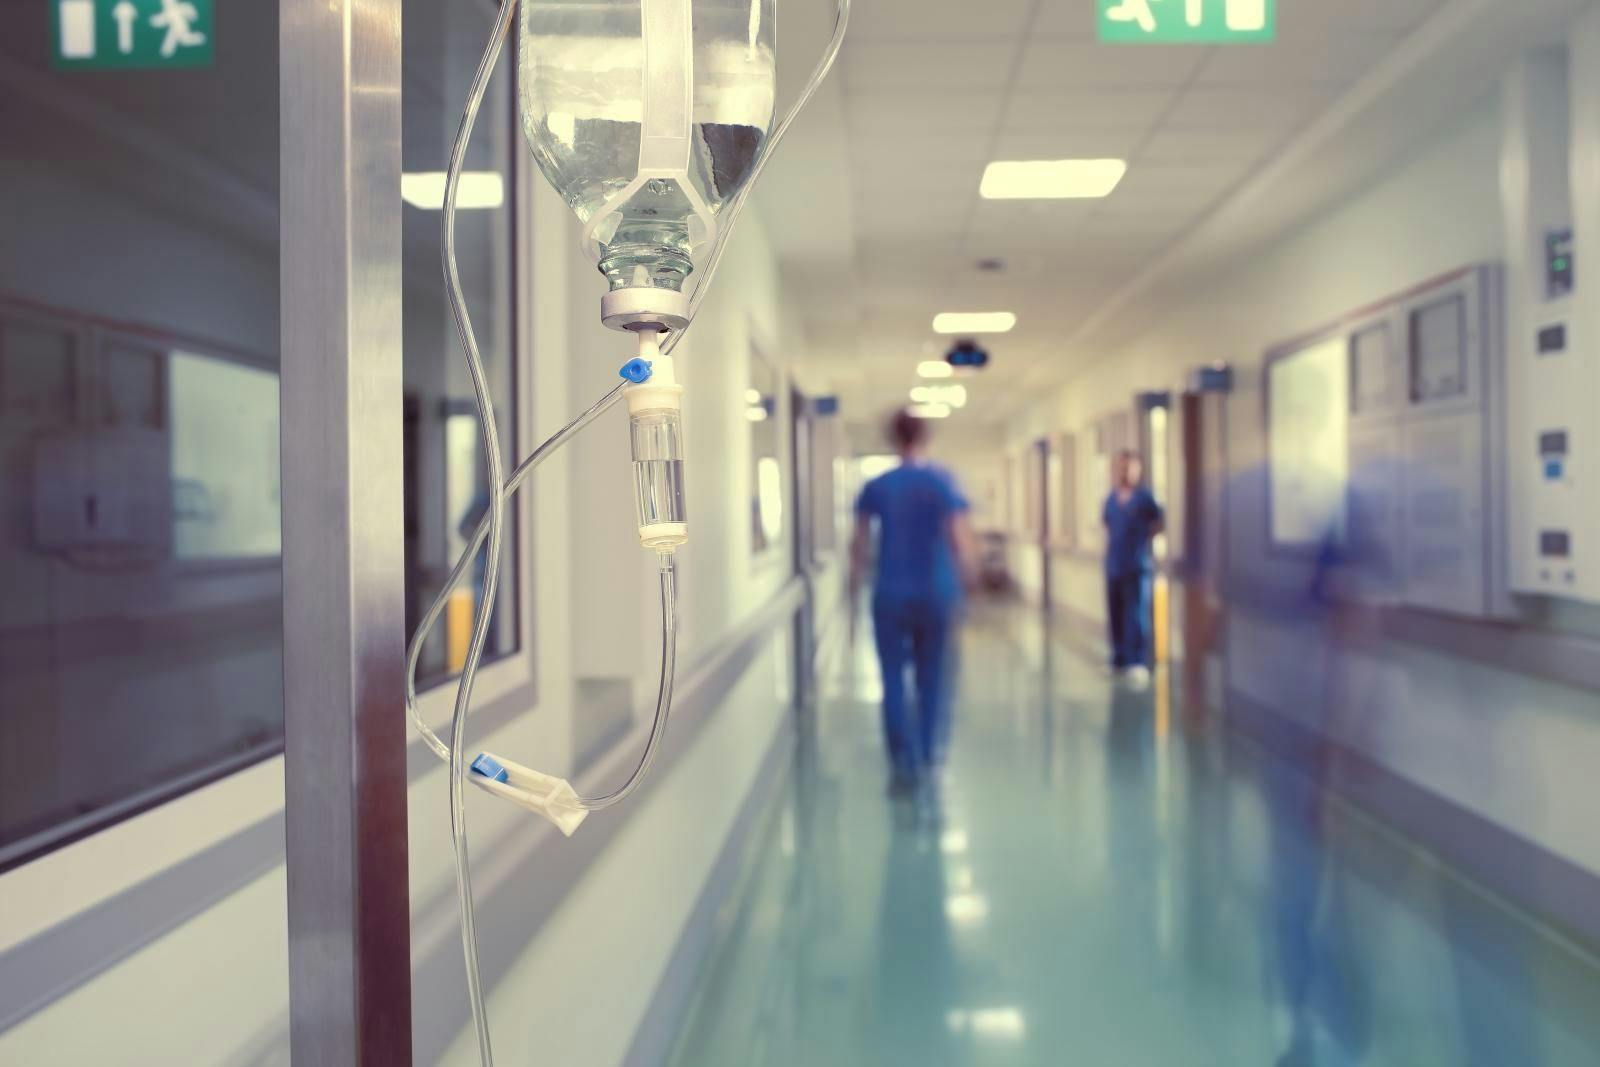 New Study Shows Connection Between Airborne Norovirus and Hospital Outbreaks